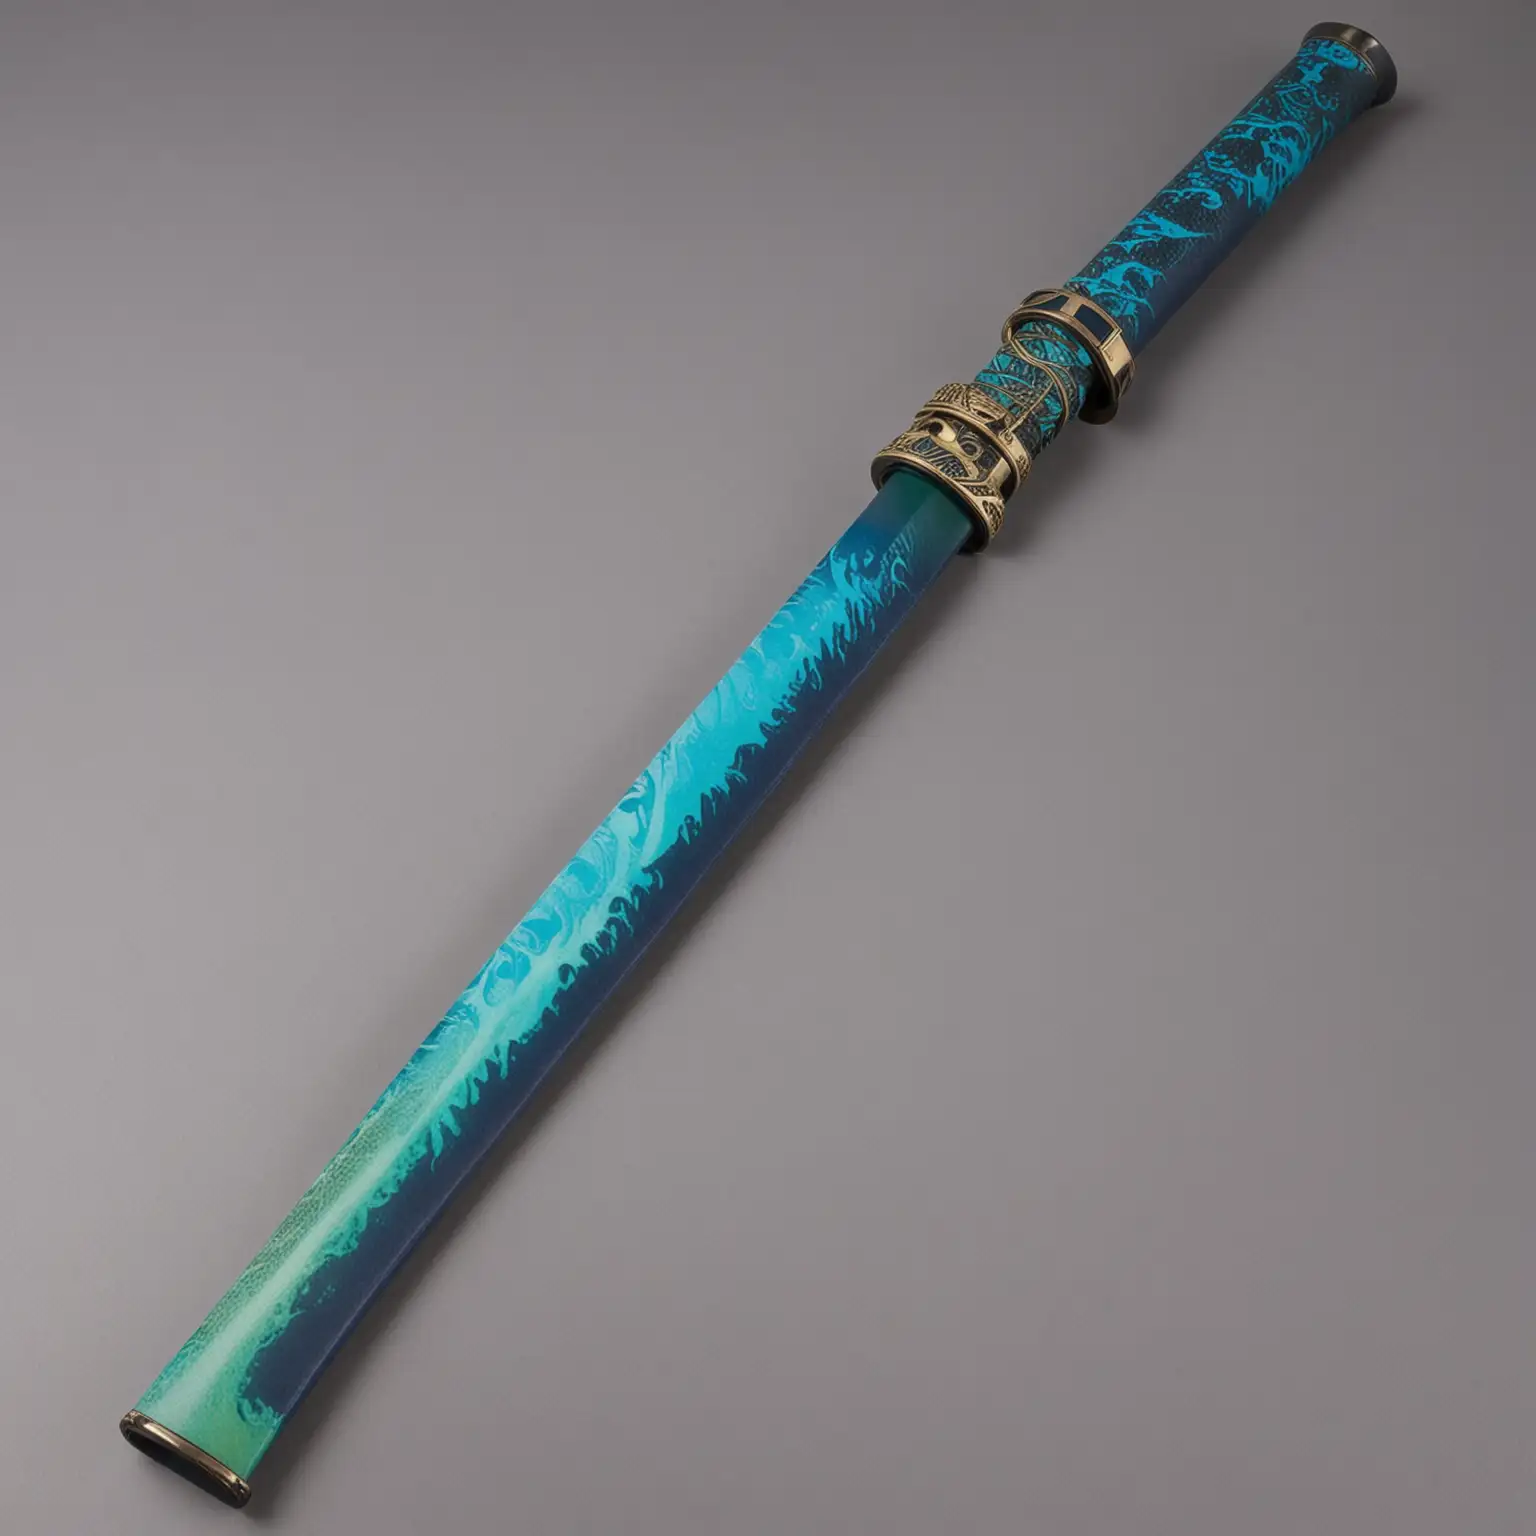 a long, blue and green katana scabbard without the blade in it